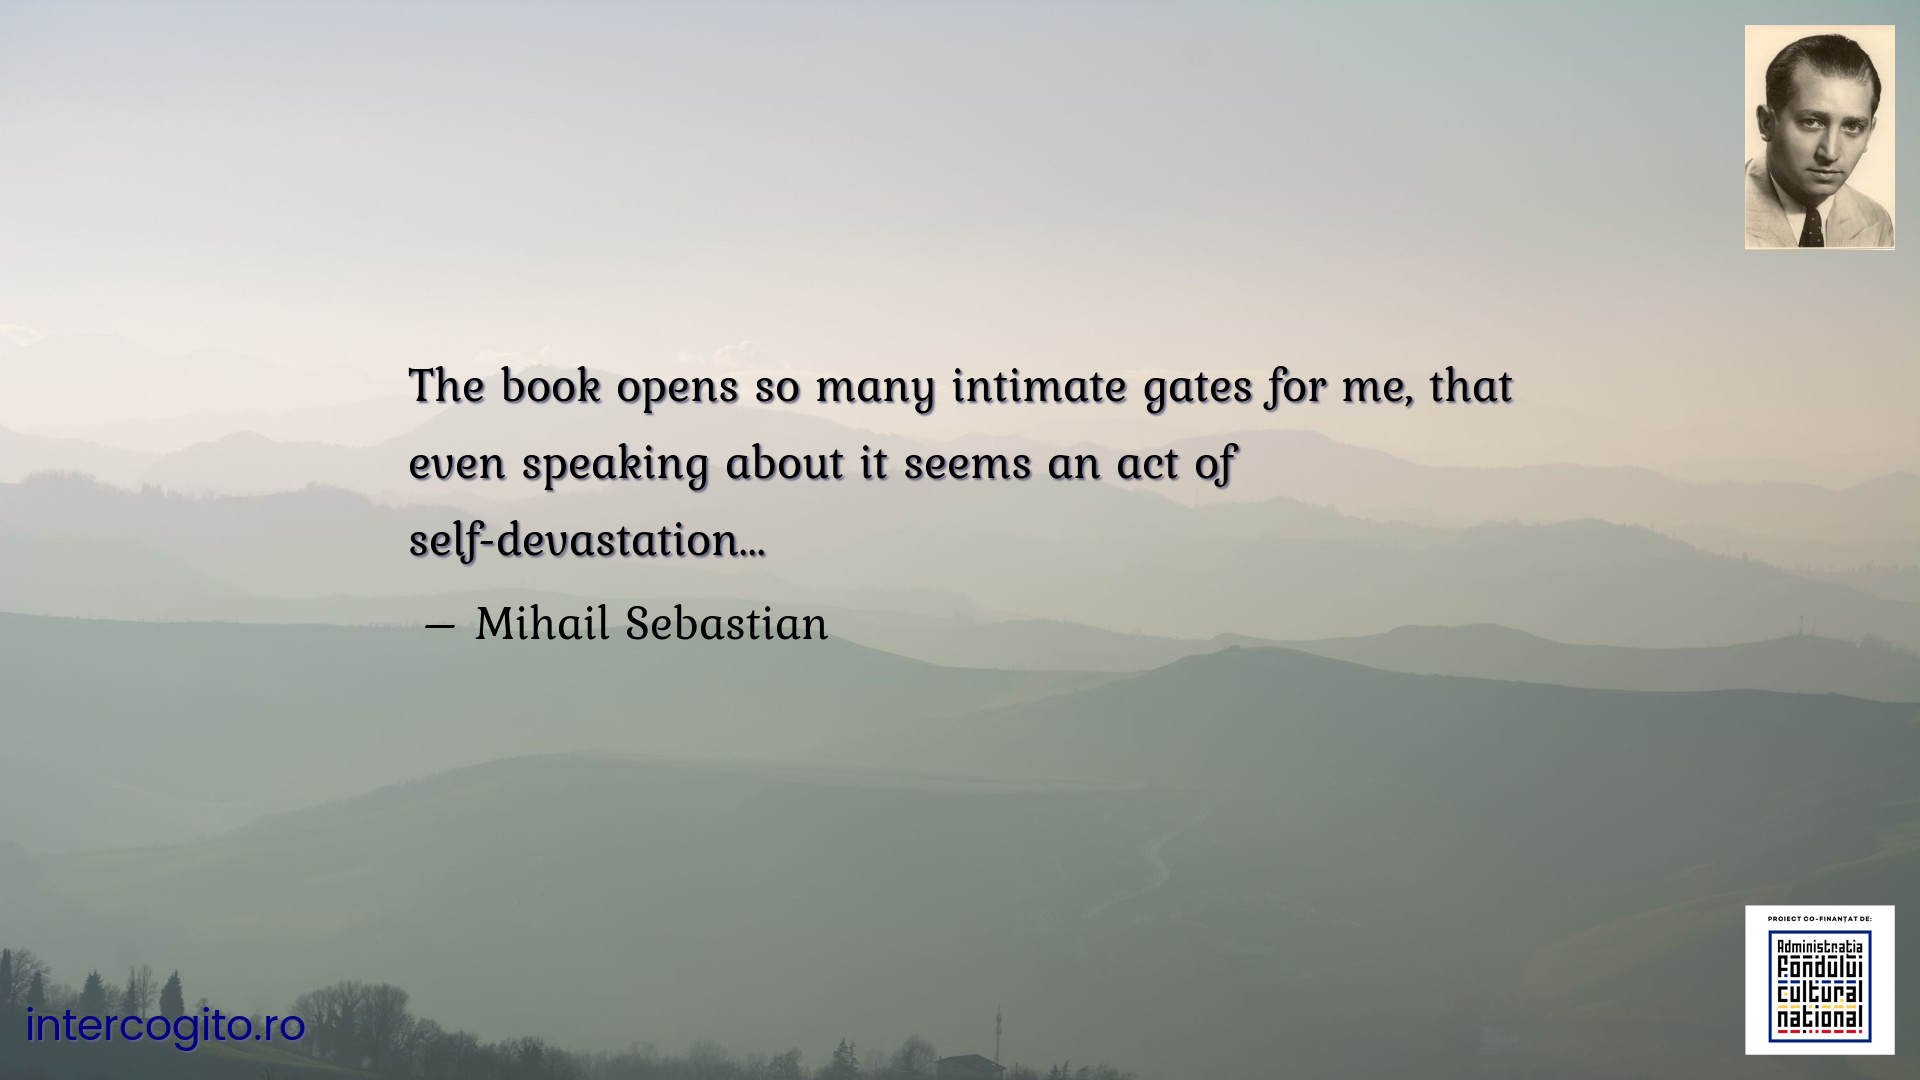 The book opens so many intimate gates for me, that even speaking about it seems an act of self-devastation...